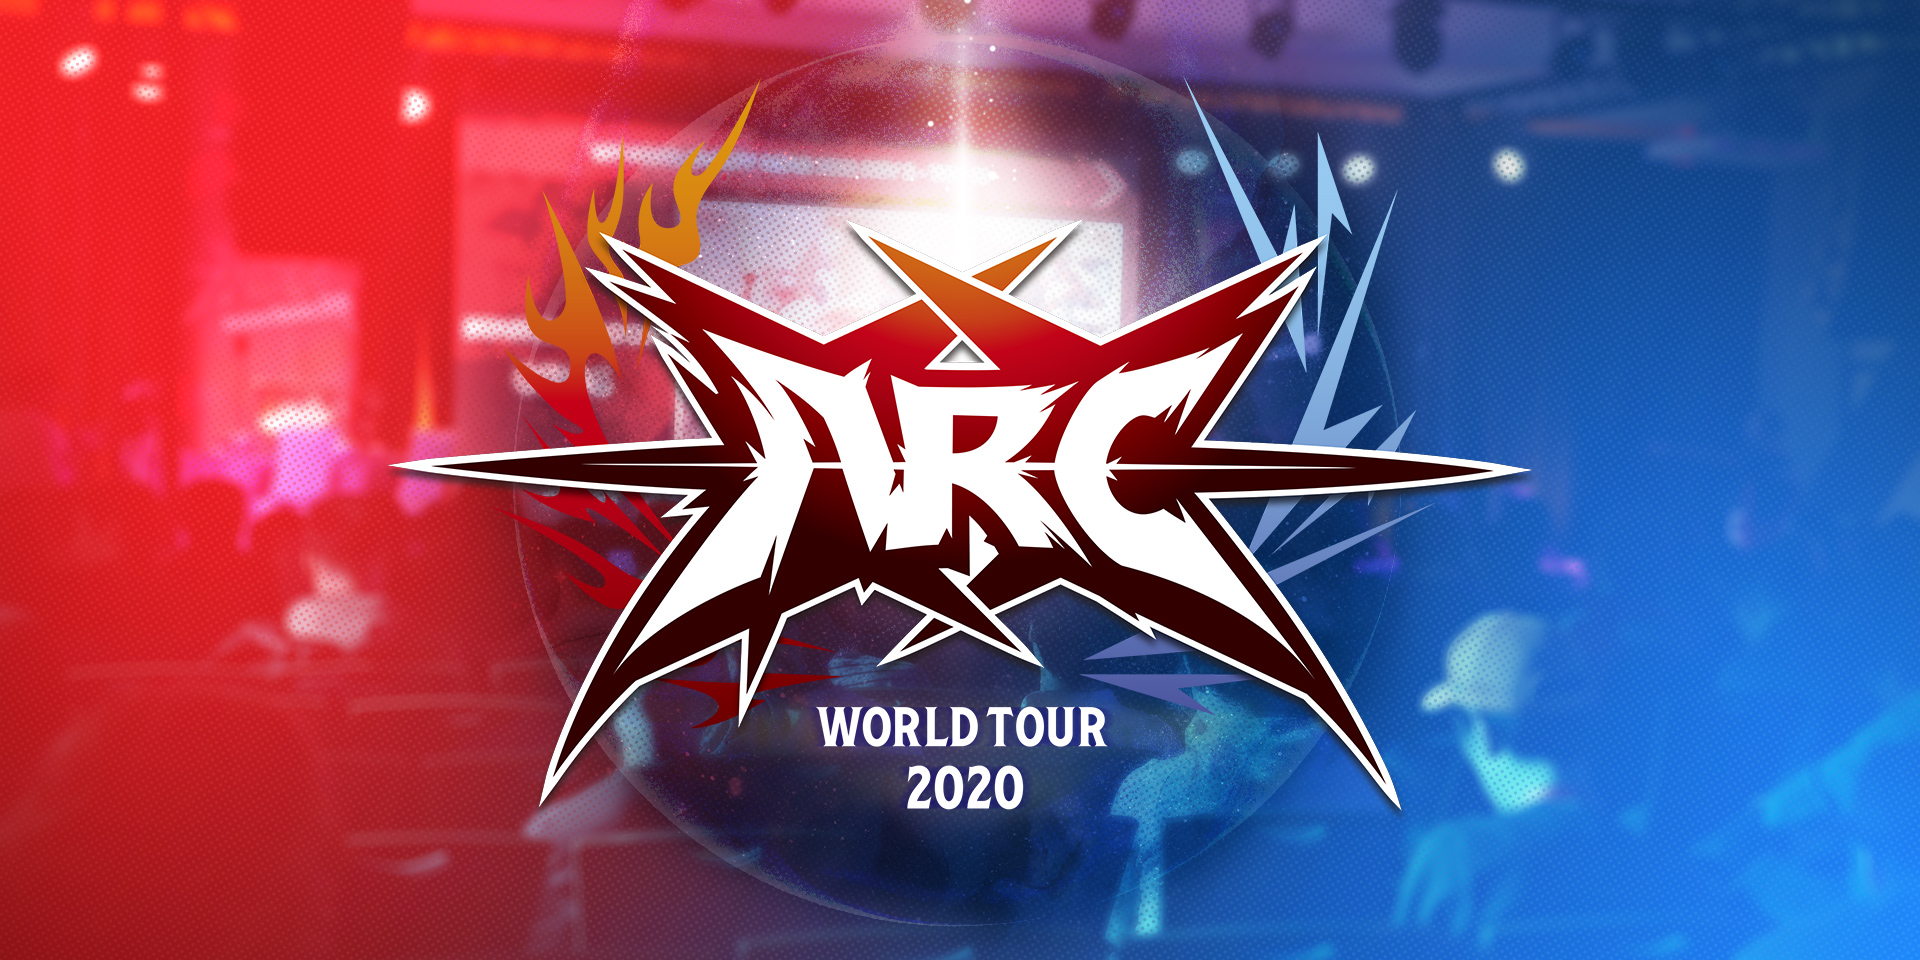 Information Regarding Daredevil Tournaments for Arc World Tour 2020 and More!